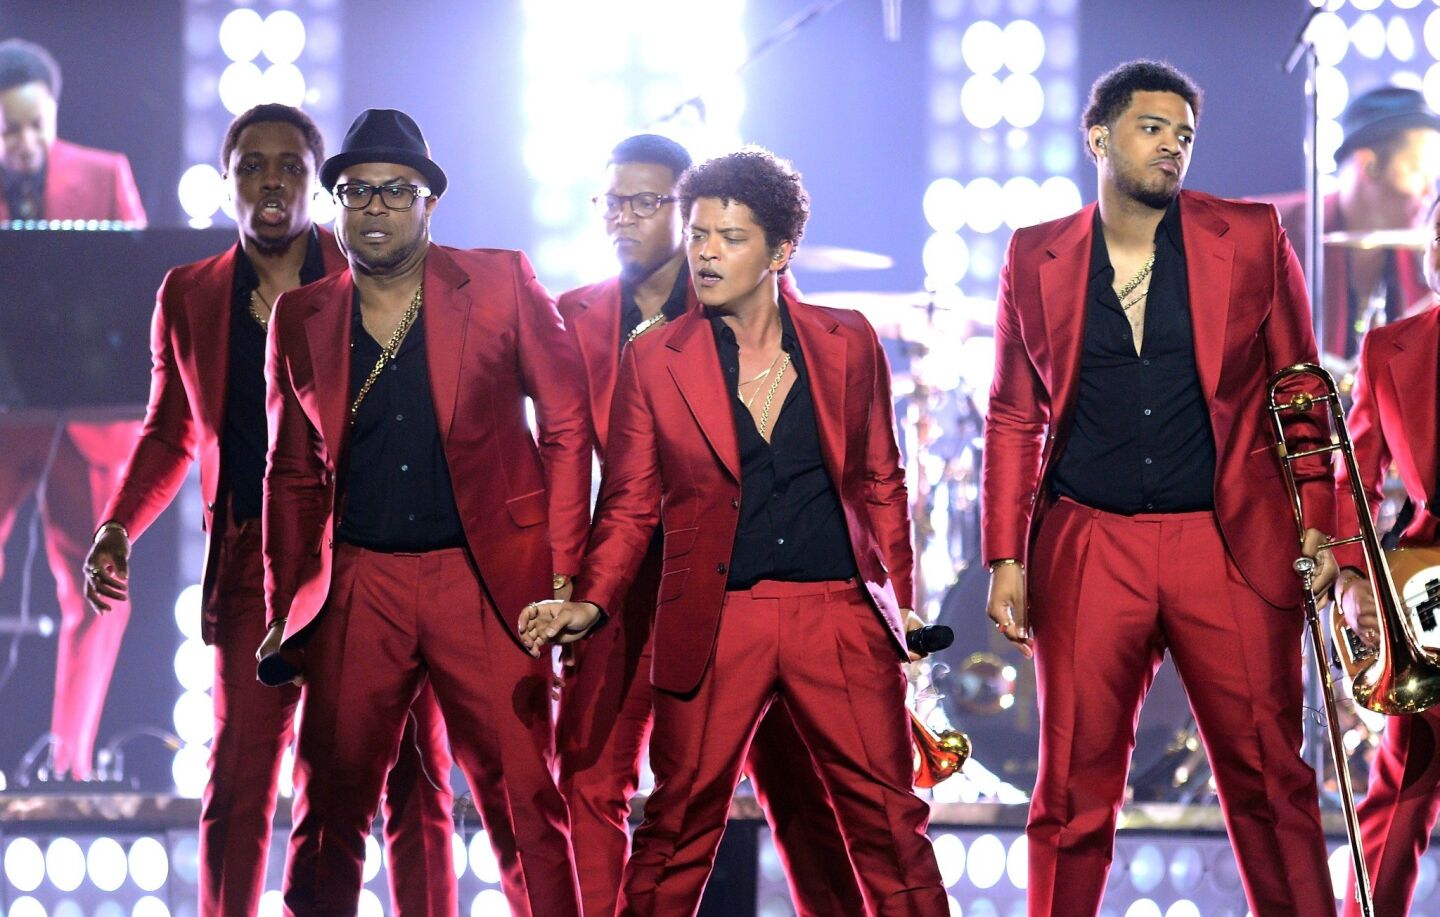 Singer Bruno Mars performs onstage during the 2013 Billboard Music Awards.